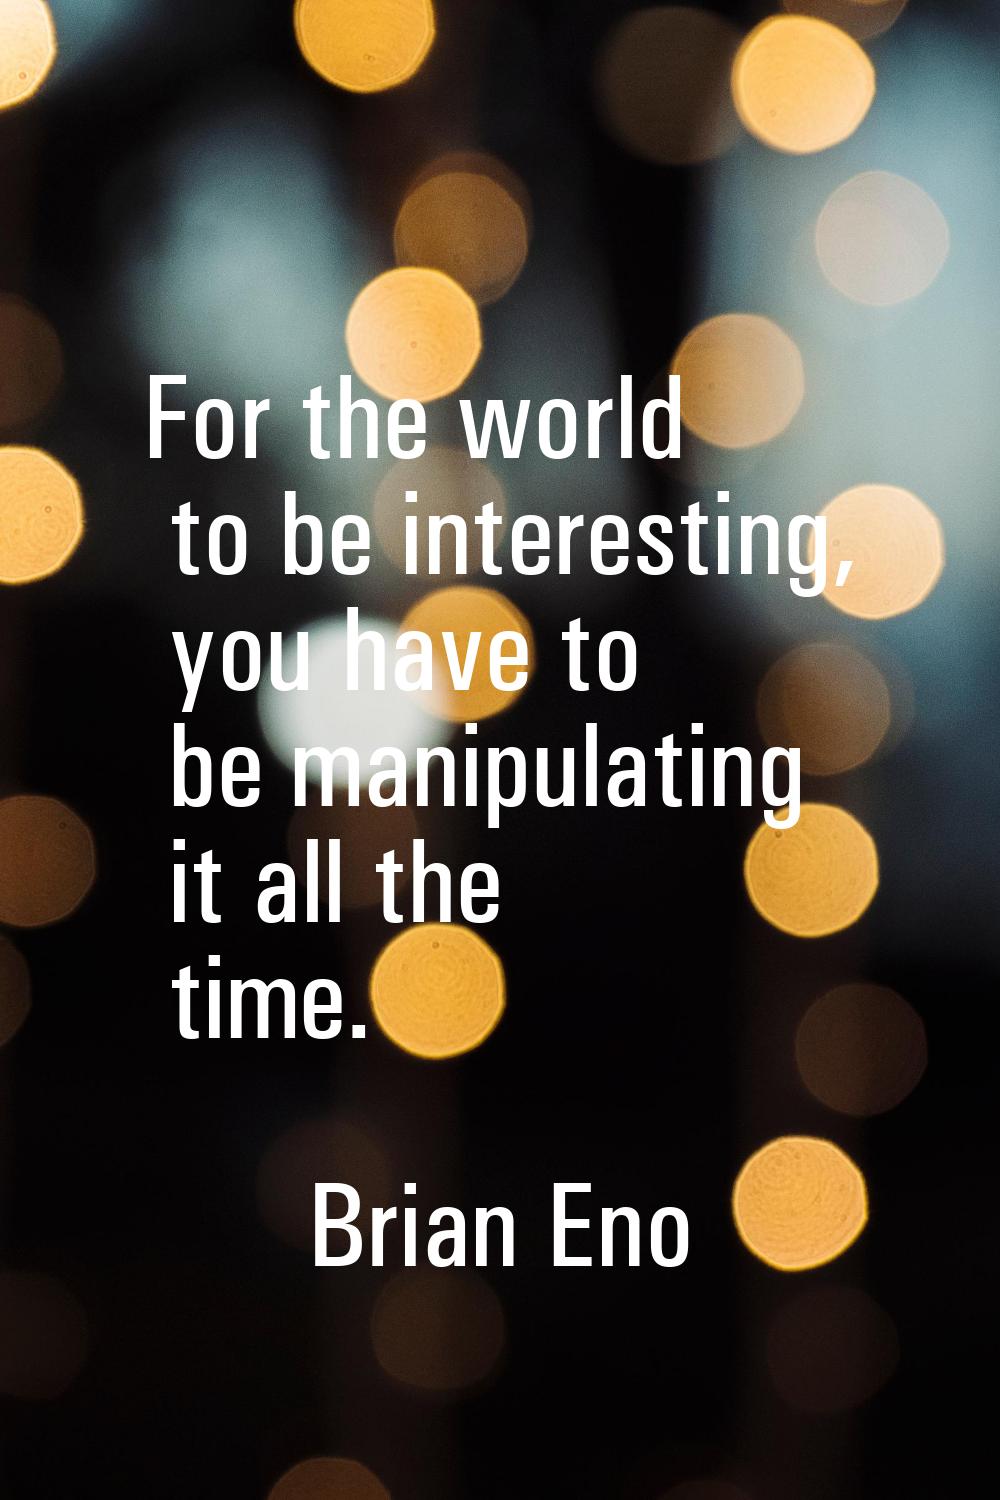 For the world to be interesting, you have to be manipulating it all the time.